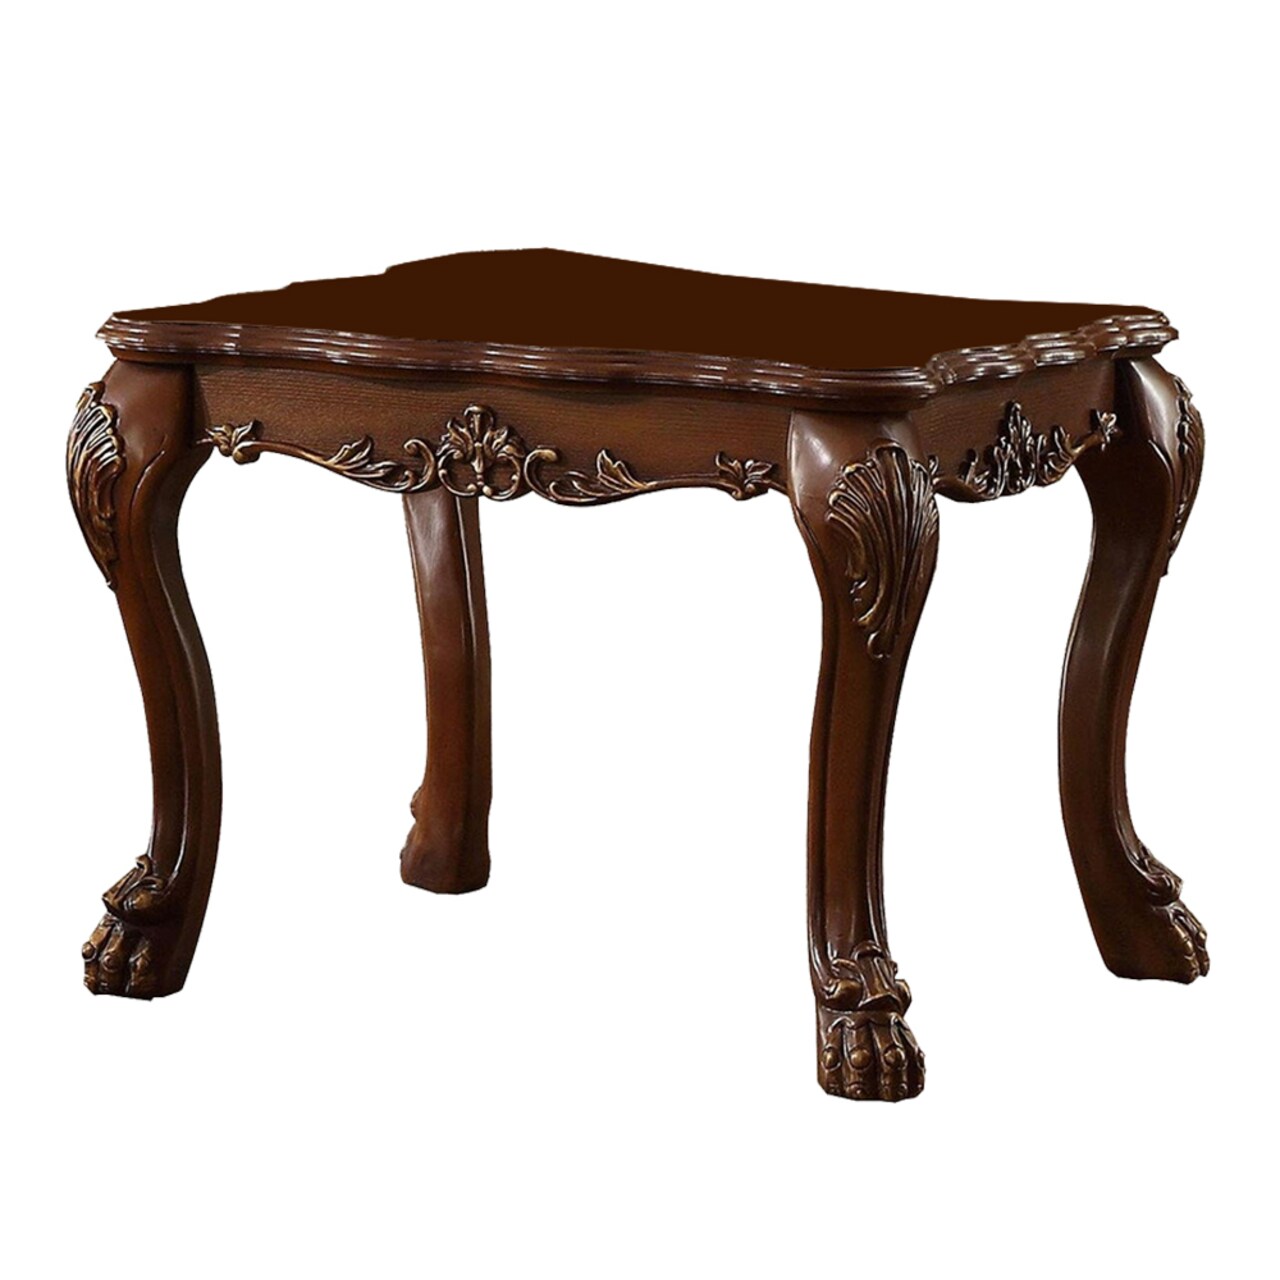 ACME Traditional Wooden End Table with Claw Feet, Cherry Oak Brown- Saltoro Sherpi